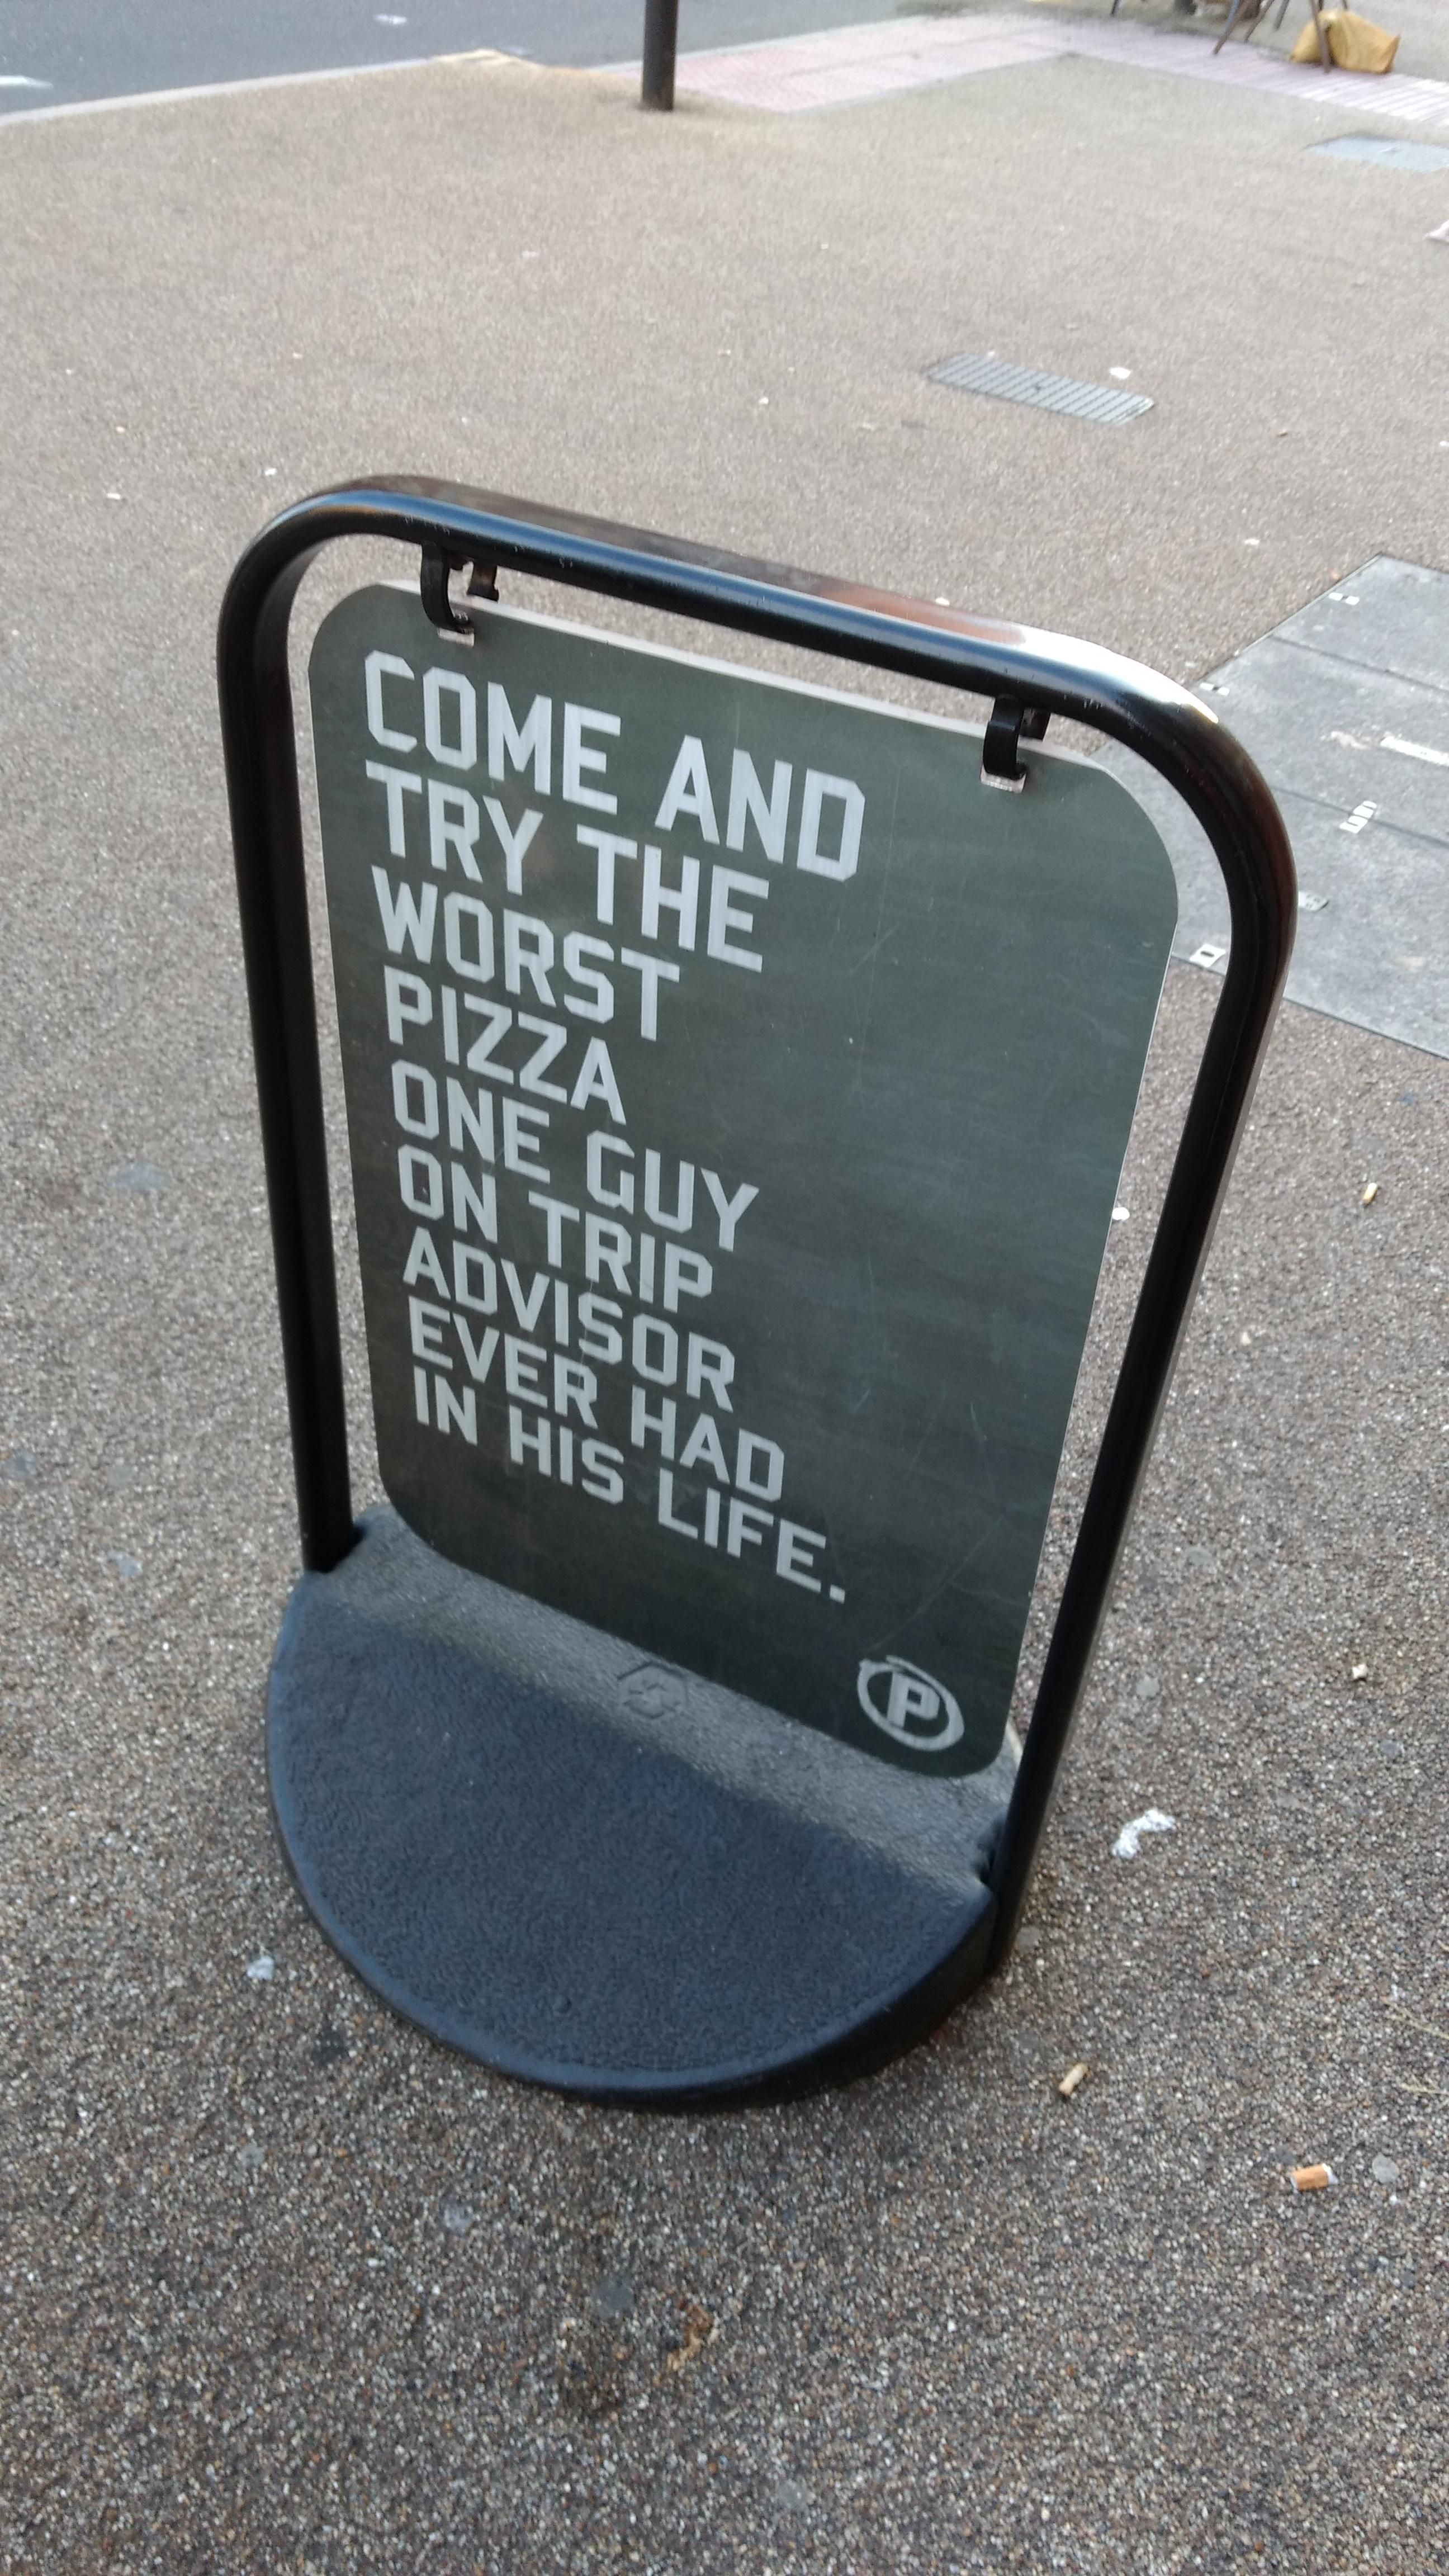 This sign at a pizza restaurant.